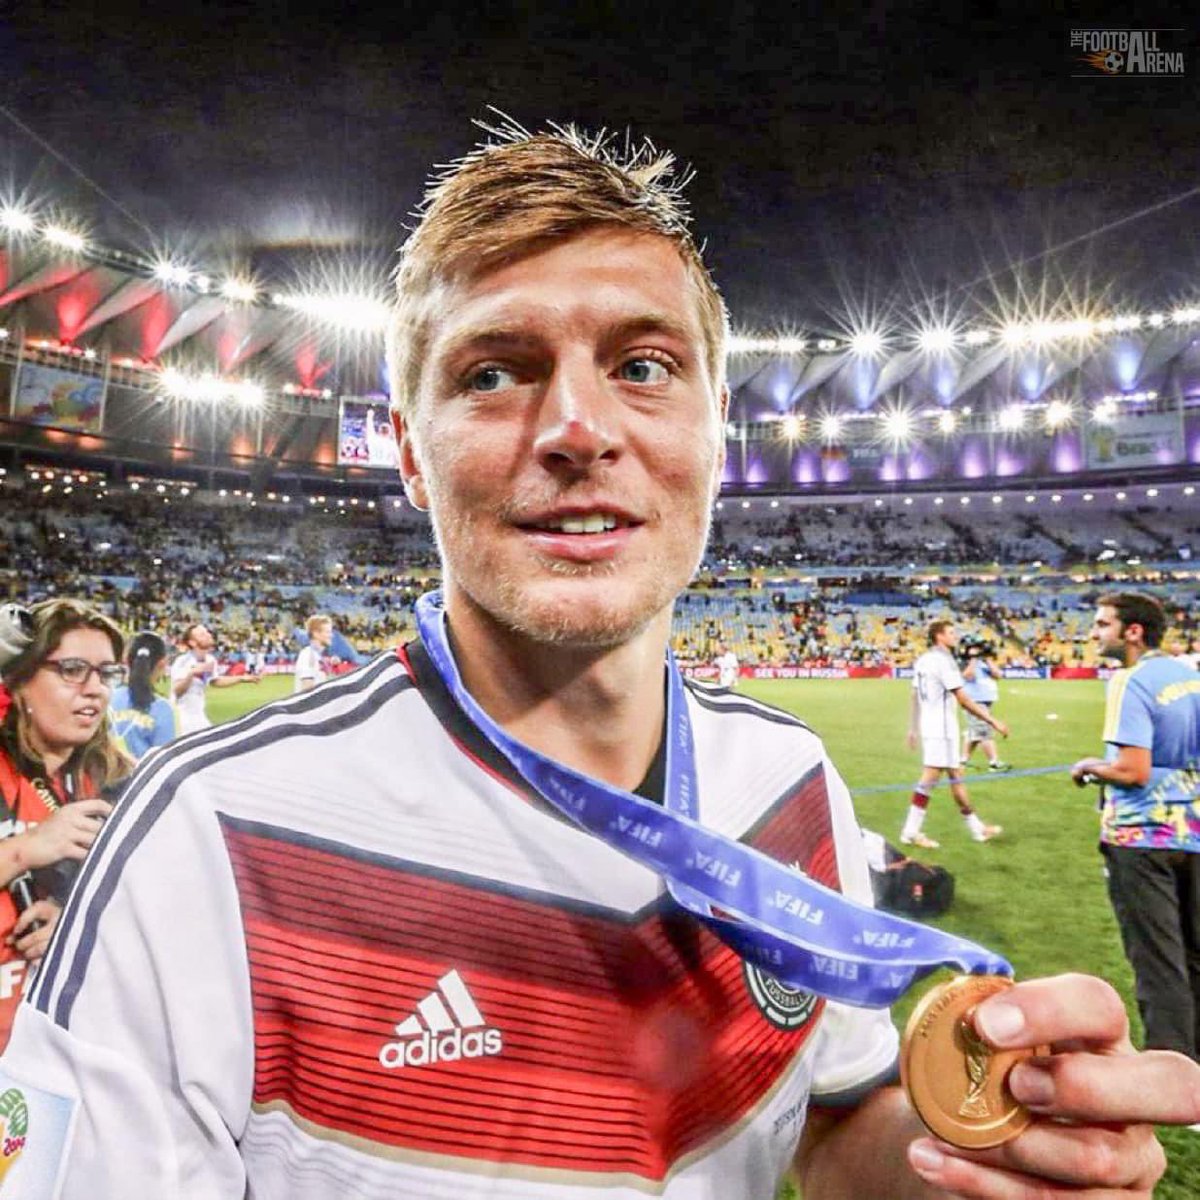 Real Madrid signed 24 year old Toni Kroos coming off a World Cup win in the summer of 2014 for €25M. He went onto win 22 trophies in 10 years, with another CL Final pending. One of the best signings in sports history.